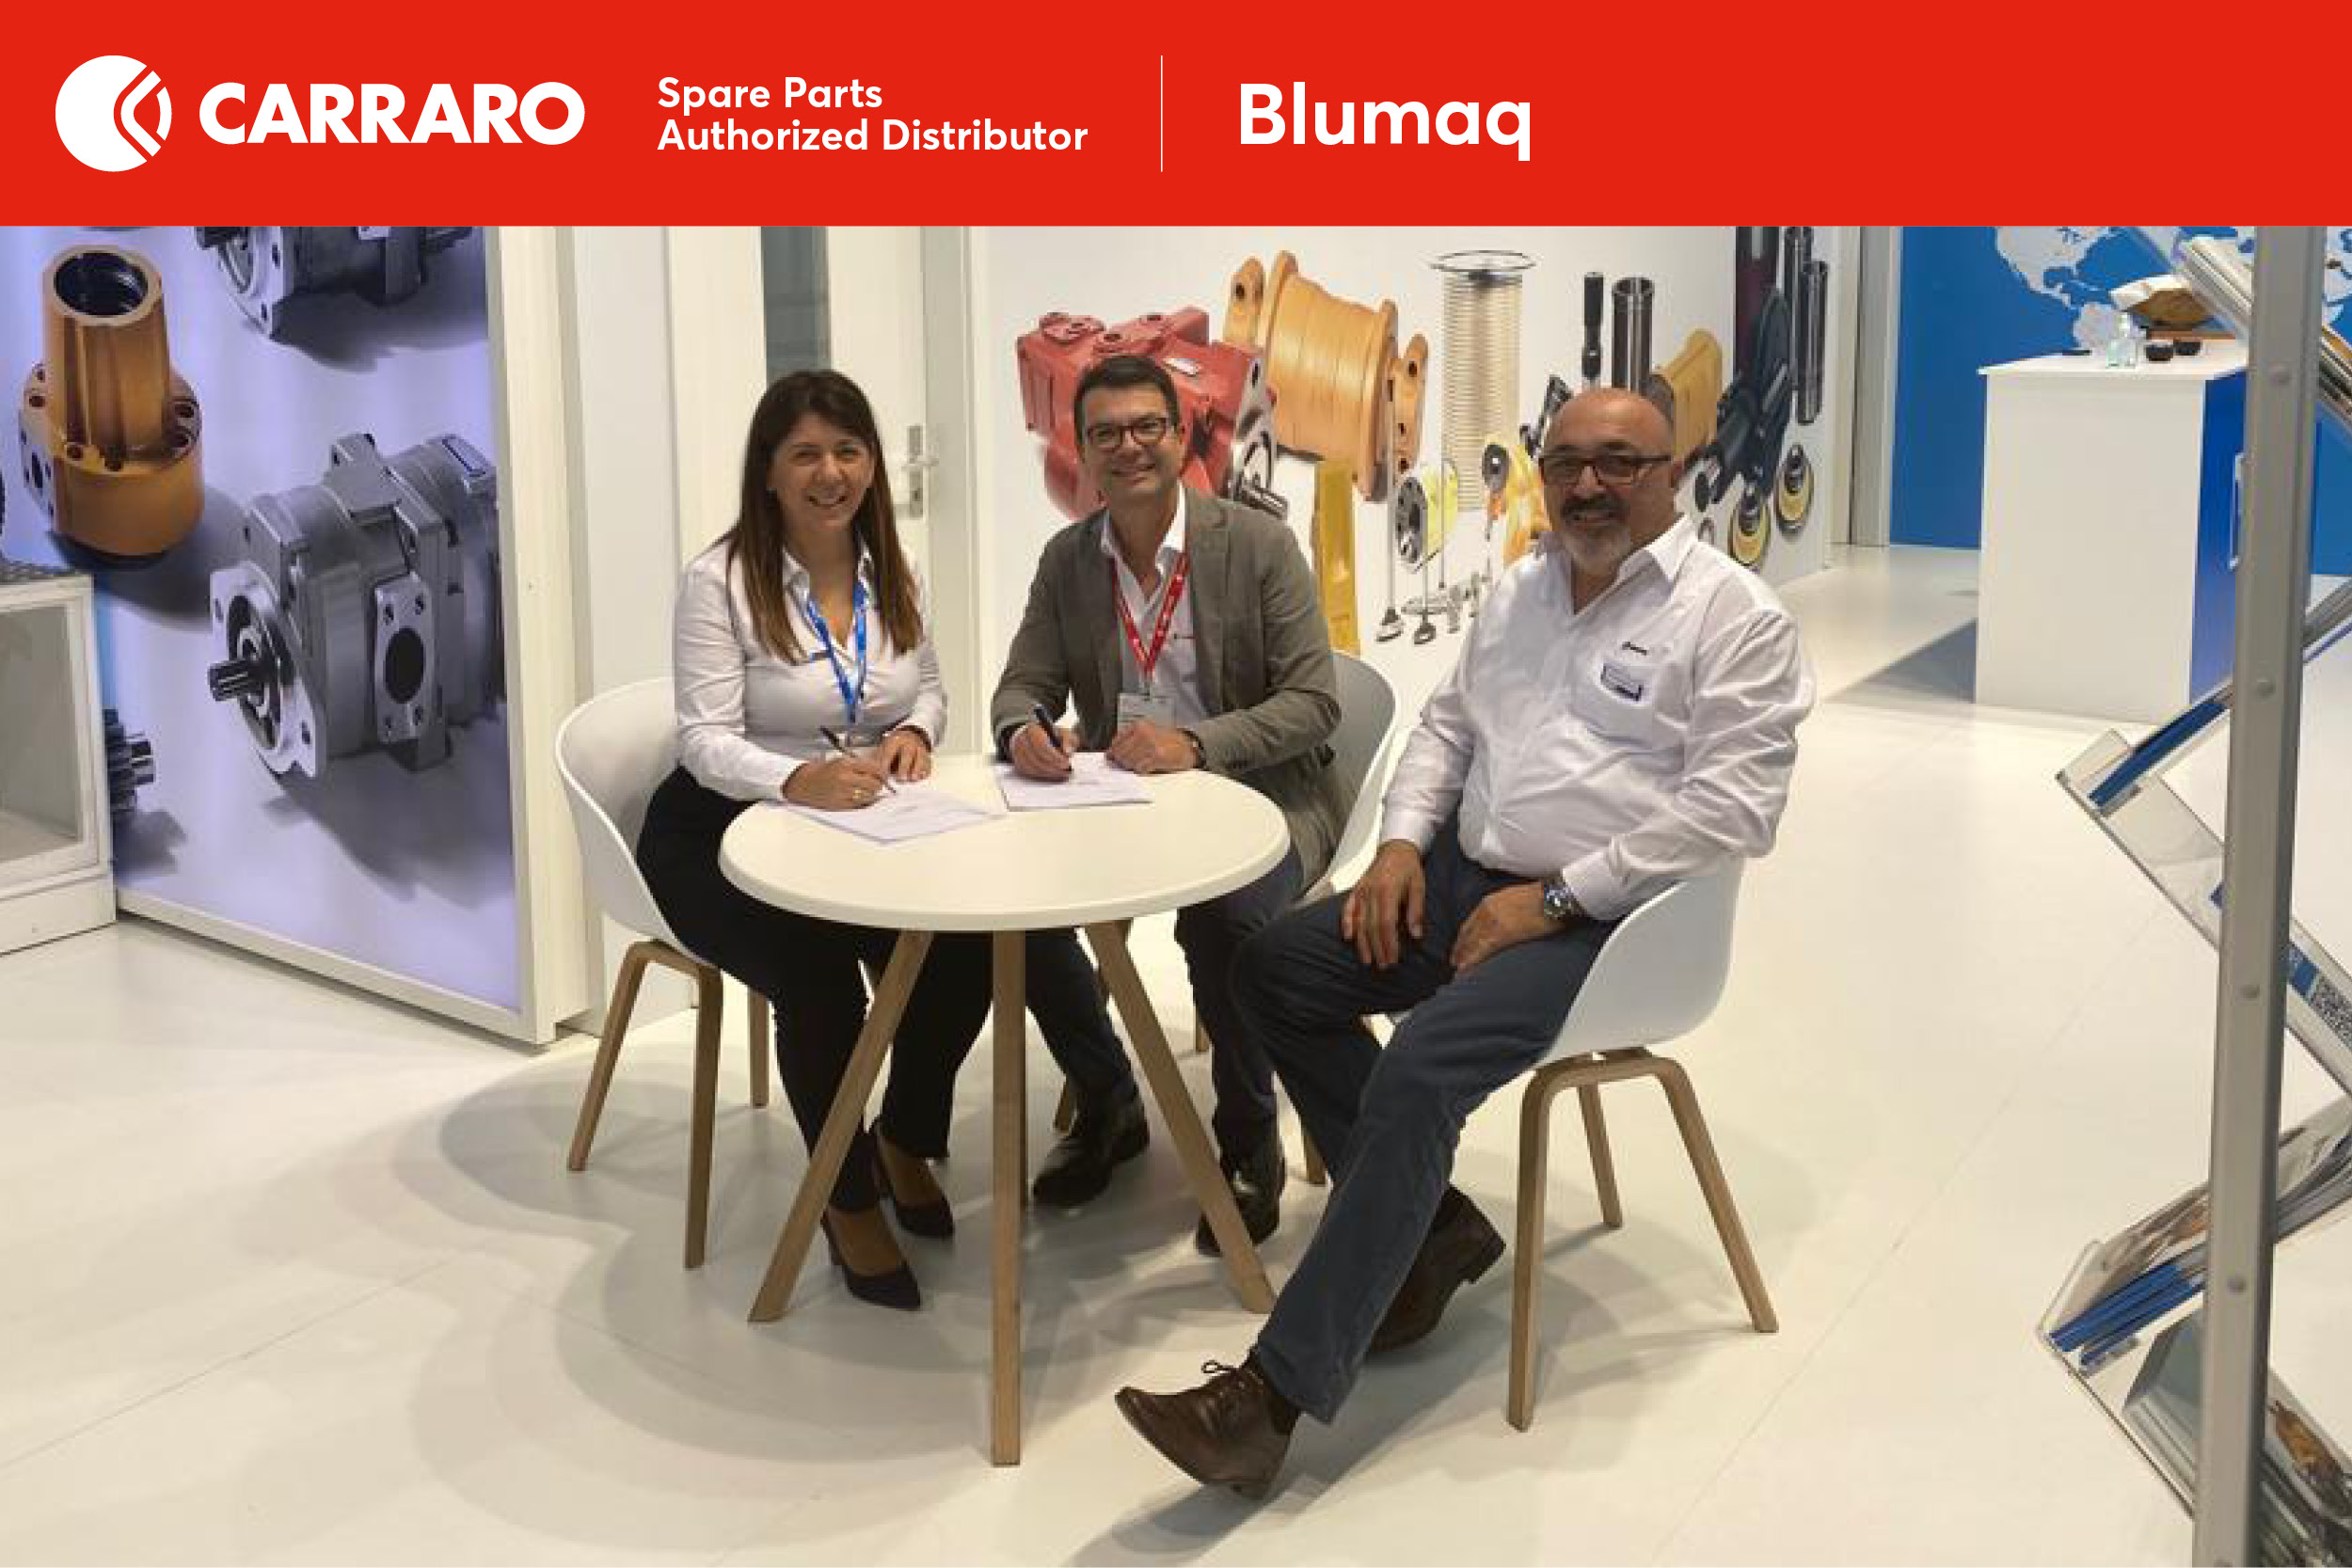 New collaboration in Spain with Blumaq!